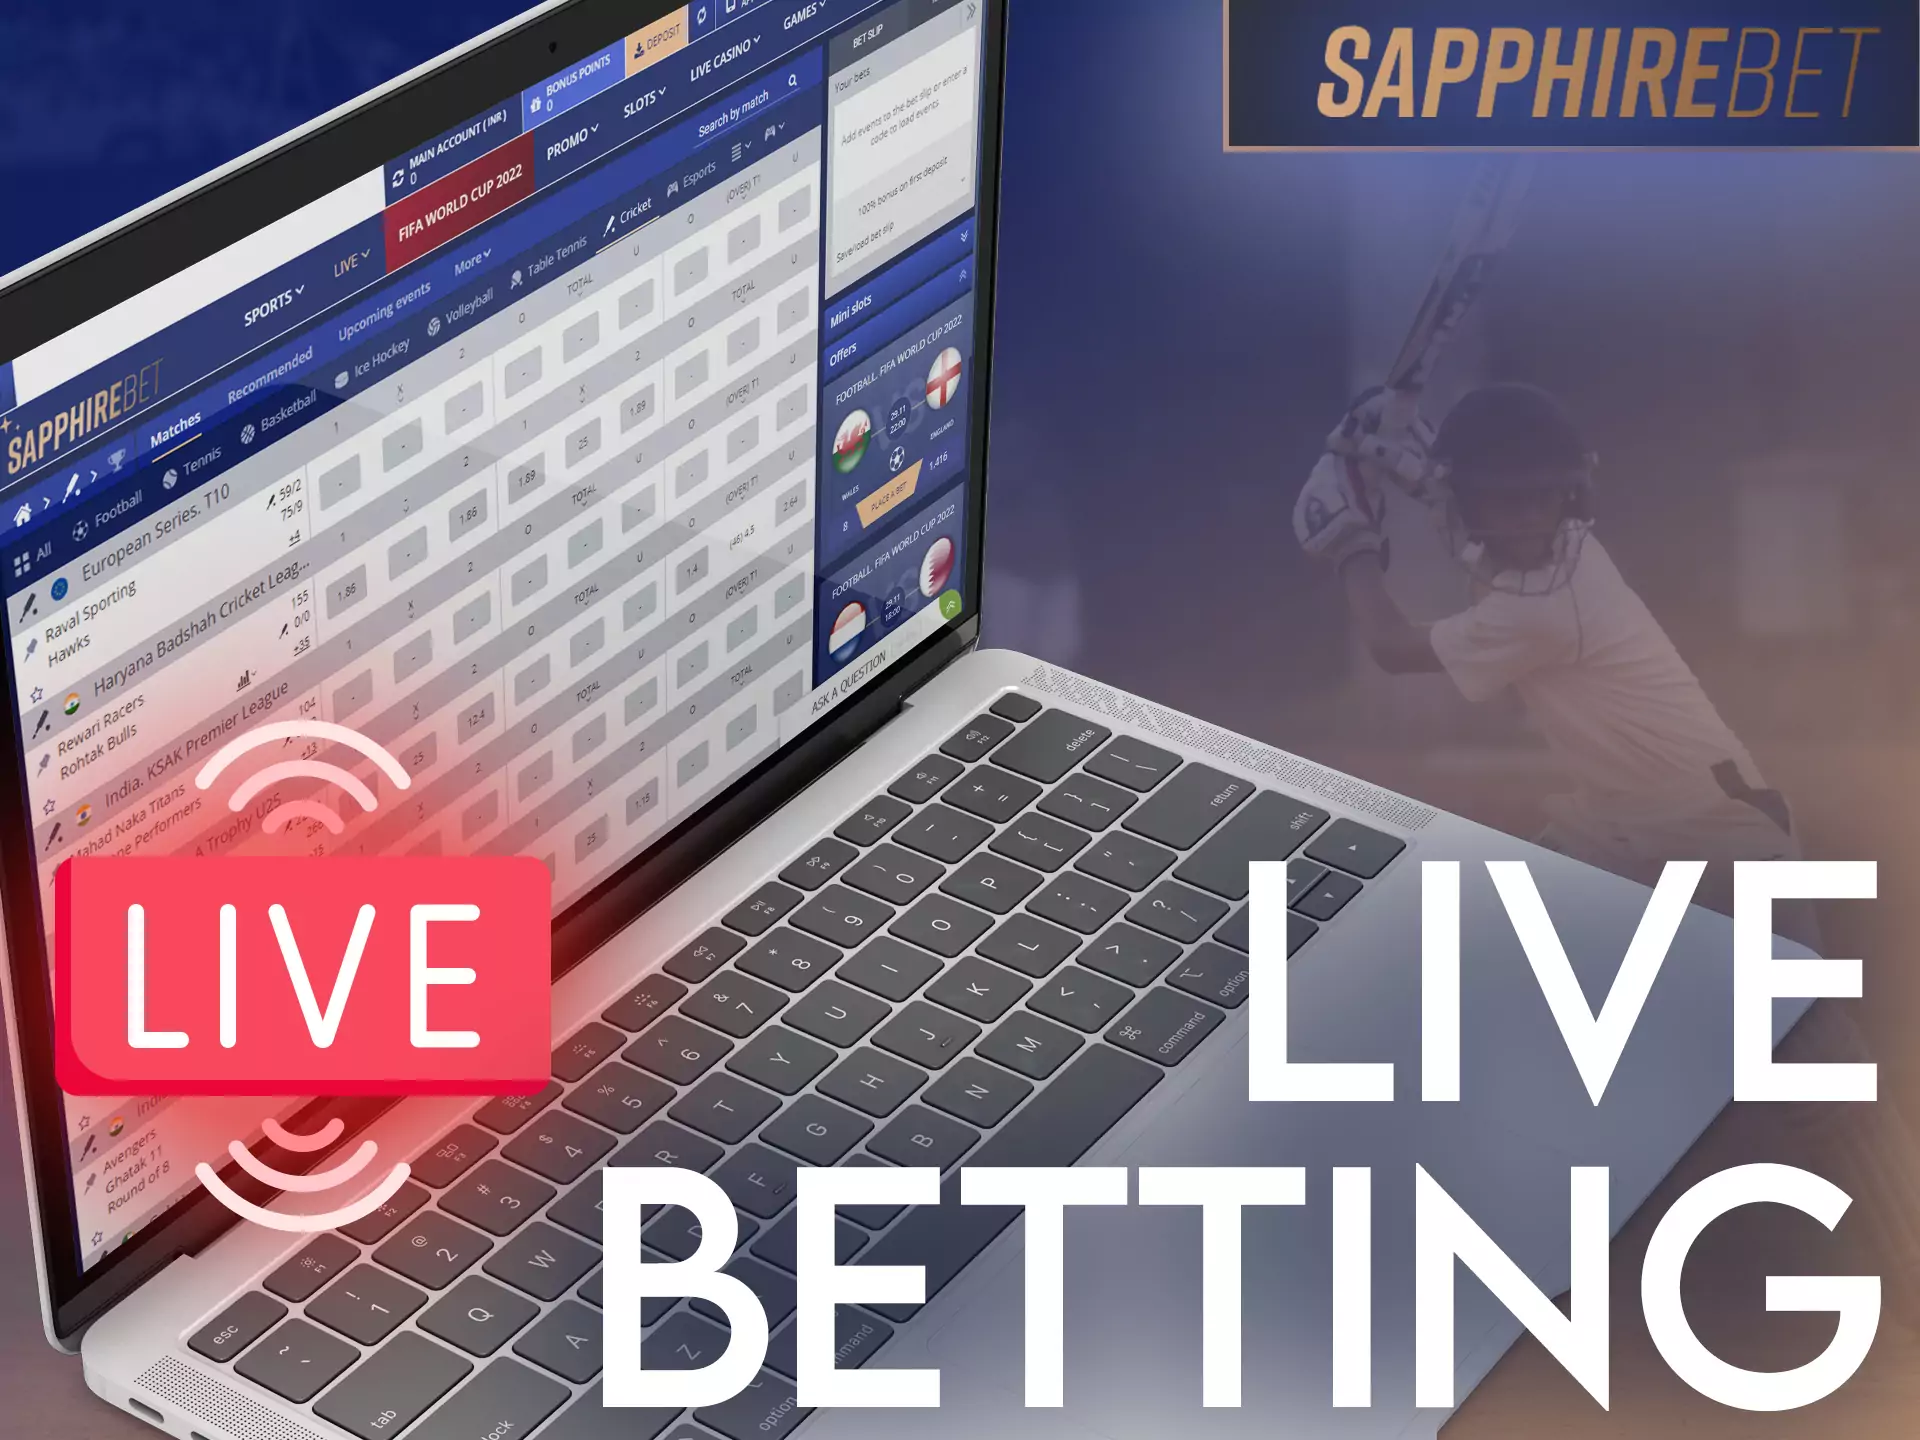 On Sapphirebet, place bets right during the match of your favorite team.